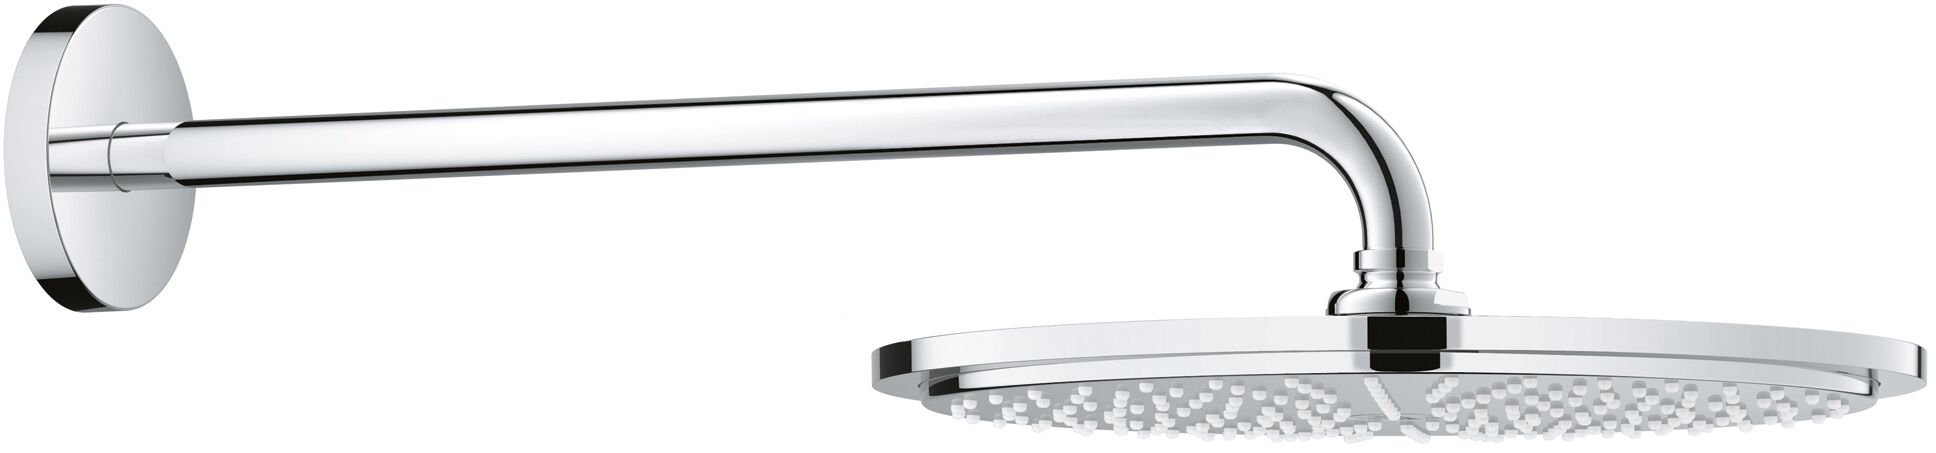 Grohe Rainshower κωδωνας 31 cm  chrome, with shower arm 422 mm